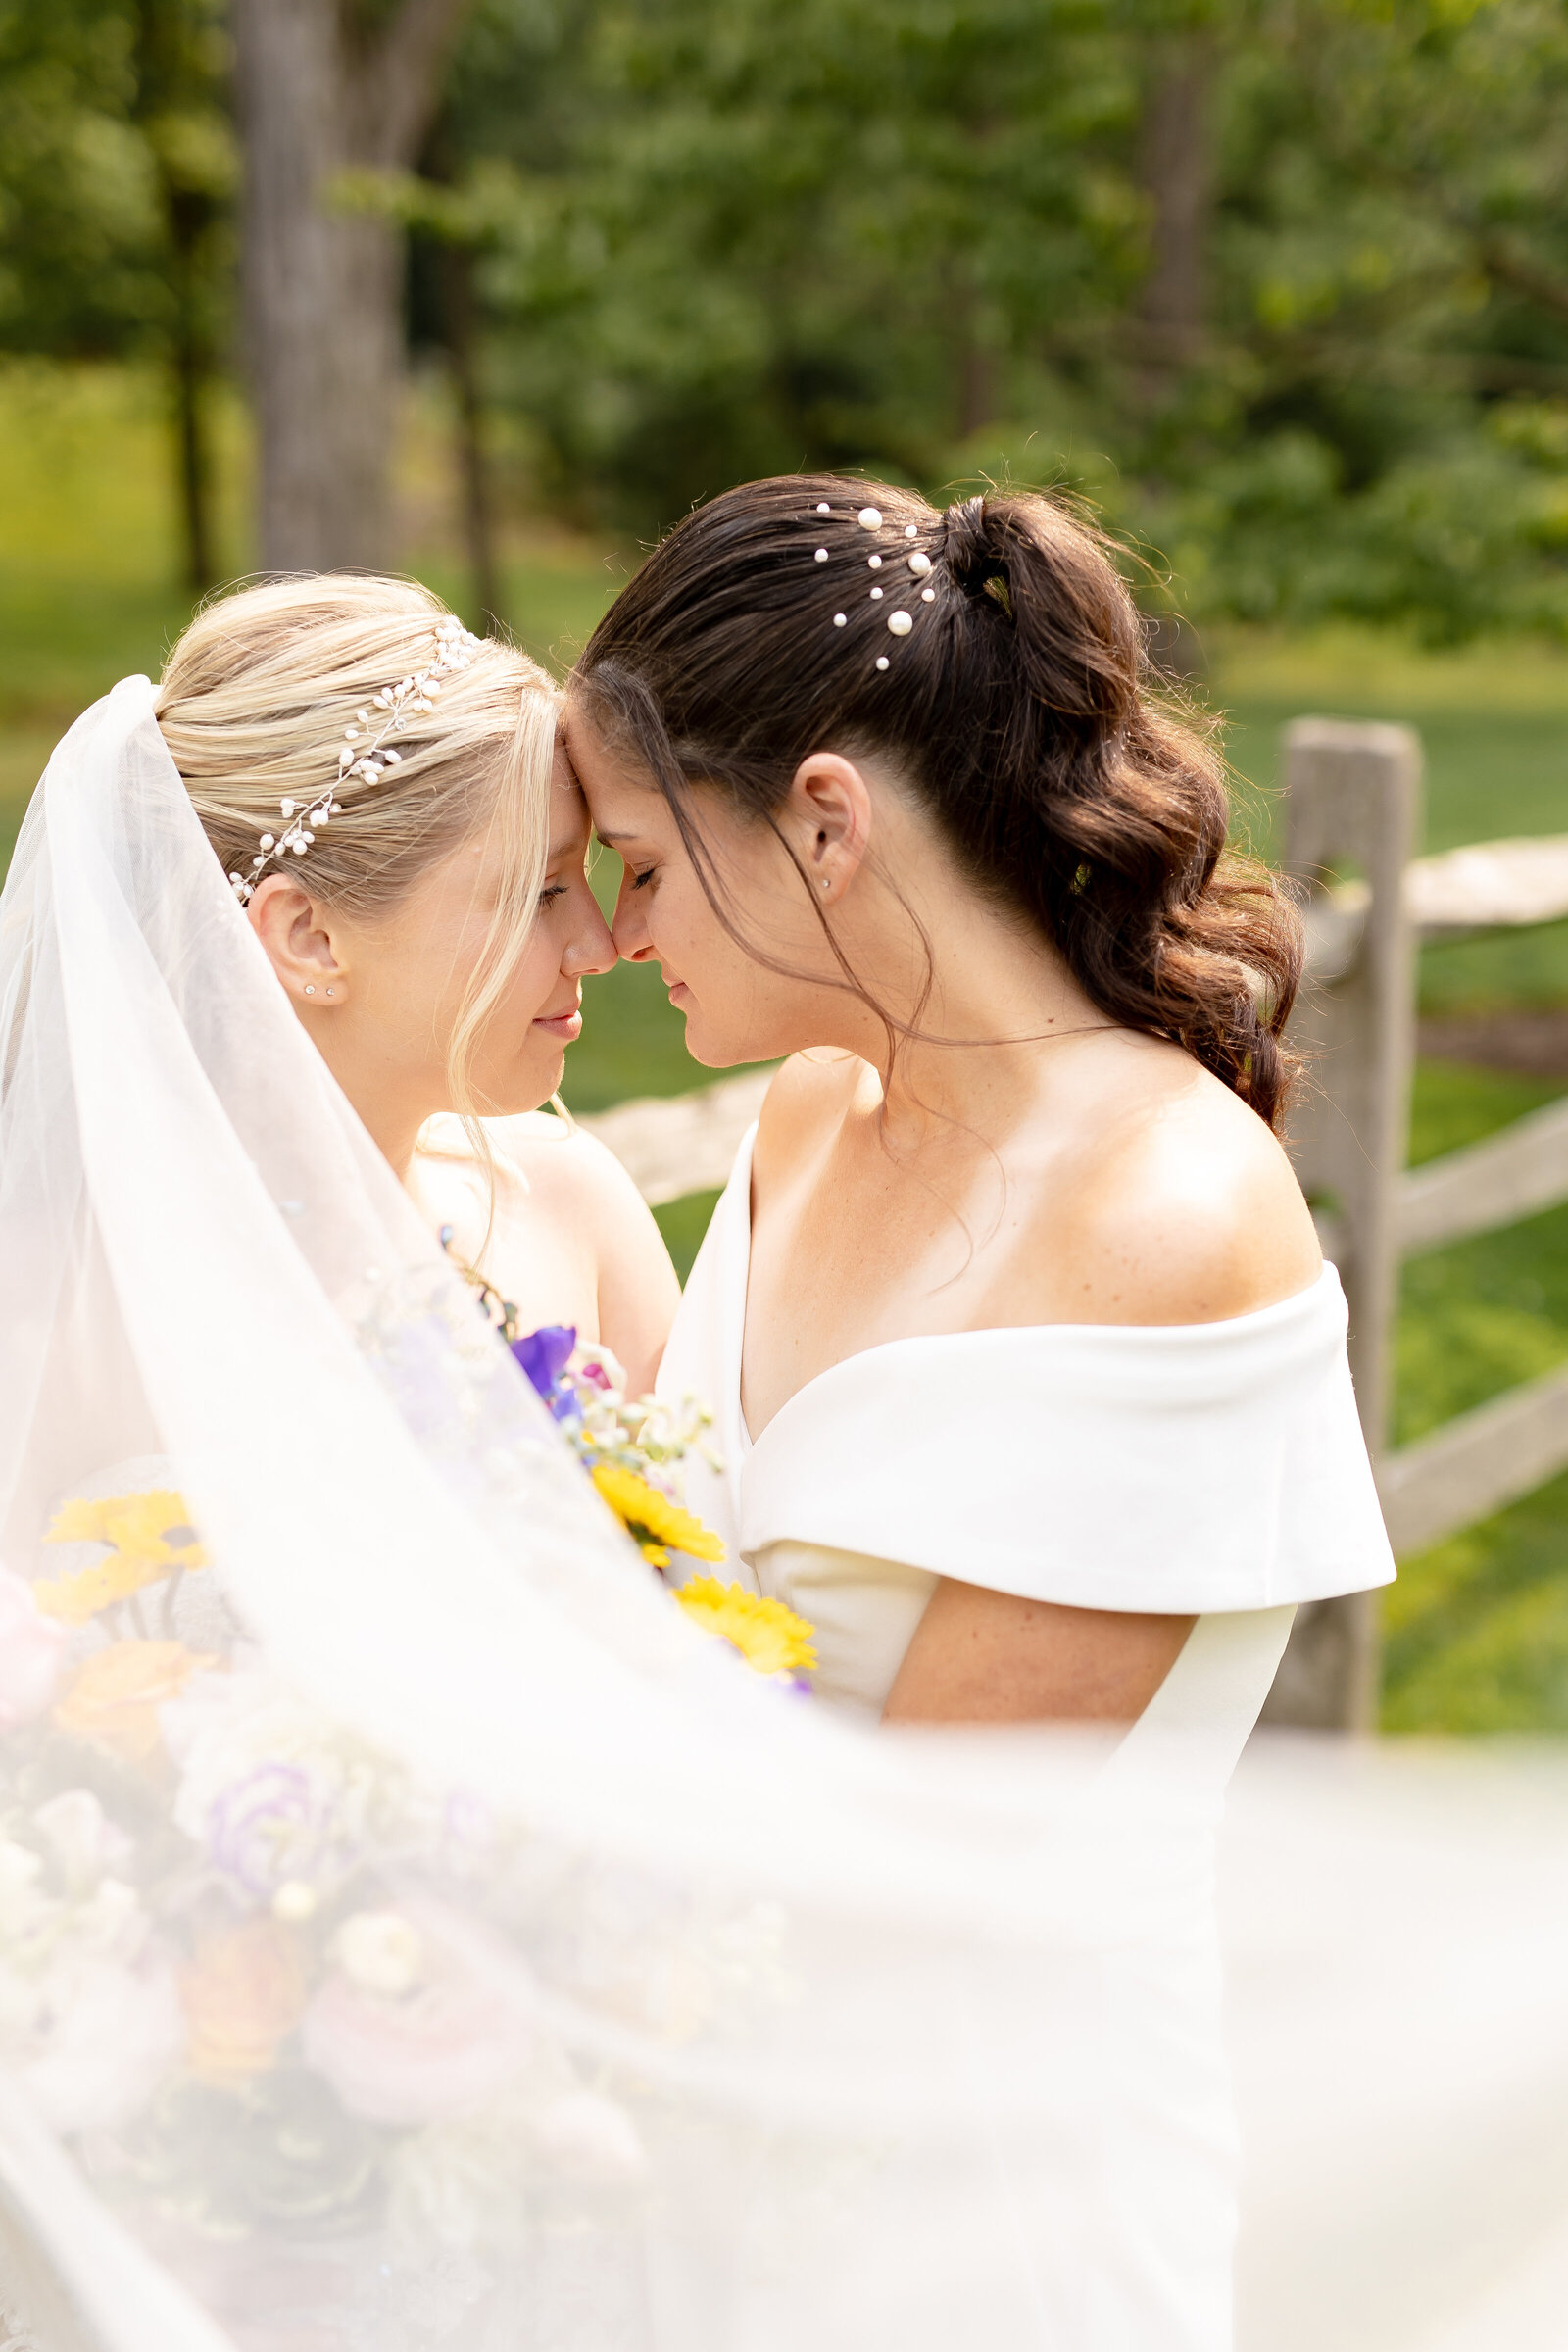 bride and bride embracing moment